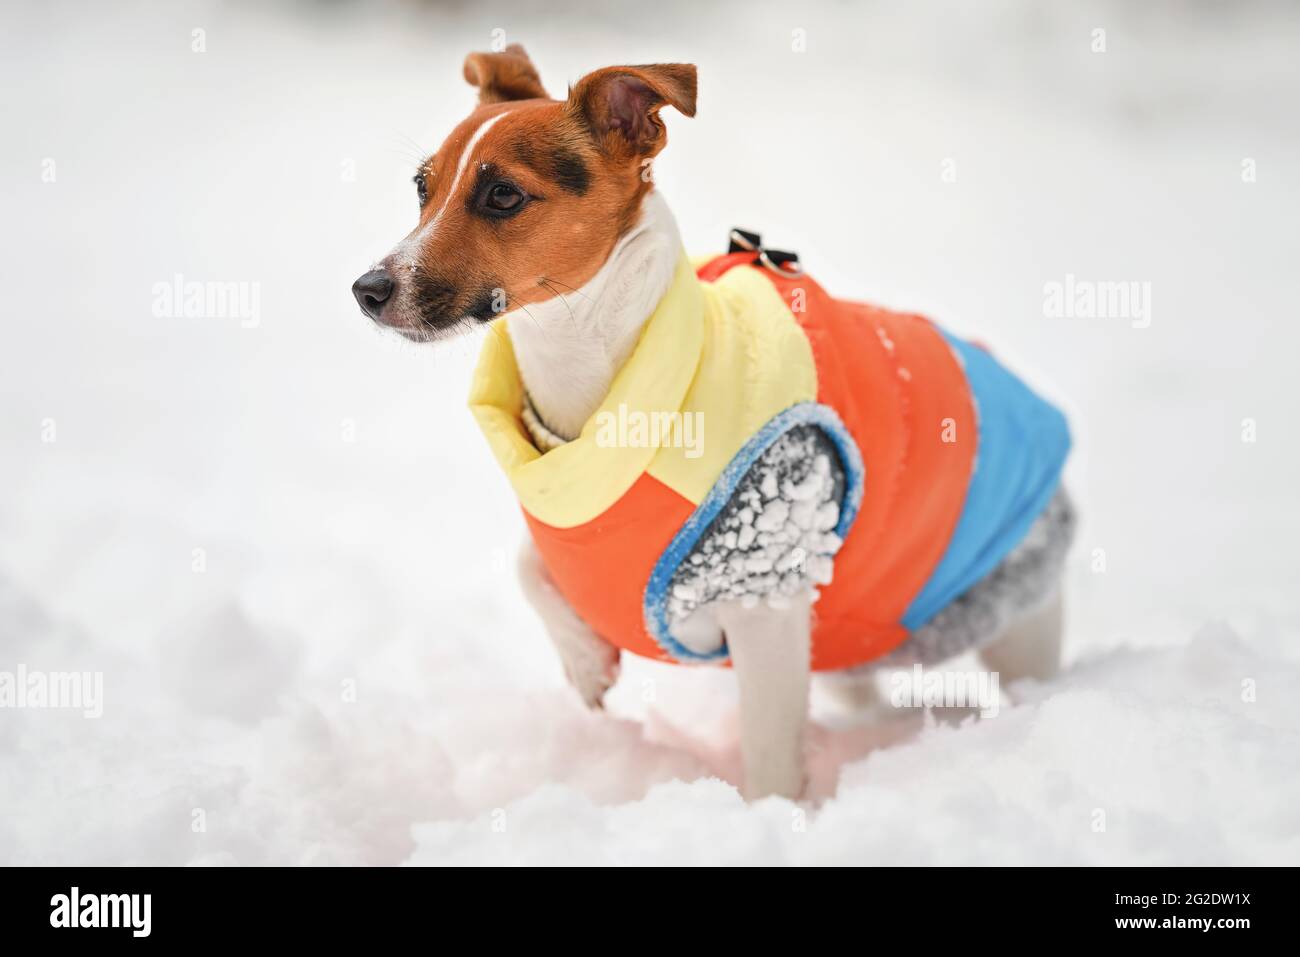 Poner a prueba o probar sonrojo internacional Small Jack Russell terrier dog in bright orange yellow and blue winter  jacket standing on snow covered ground Stock Photo - Alamy